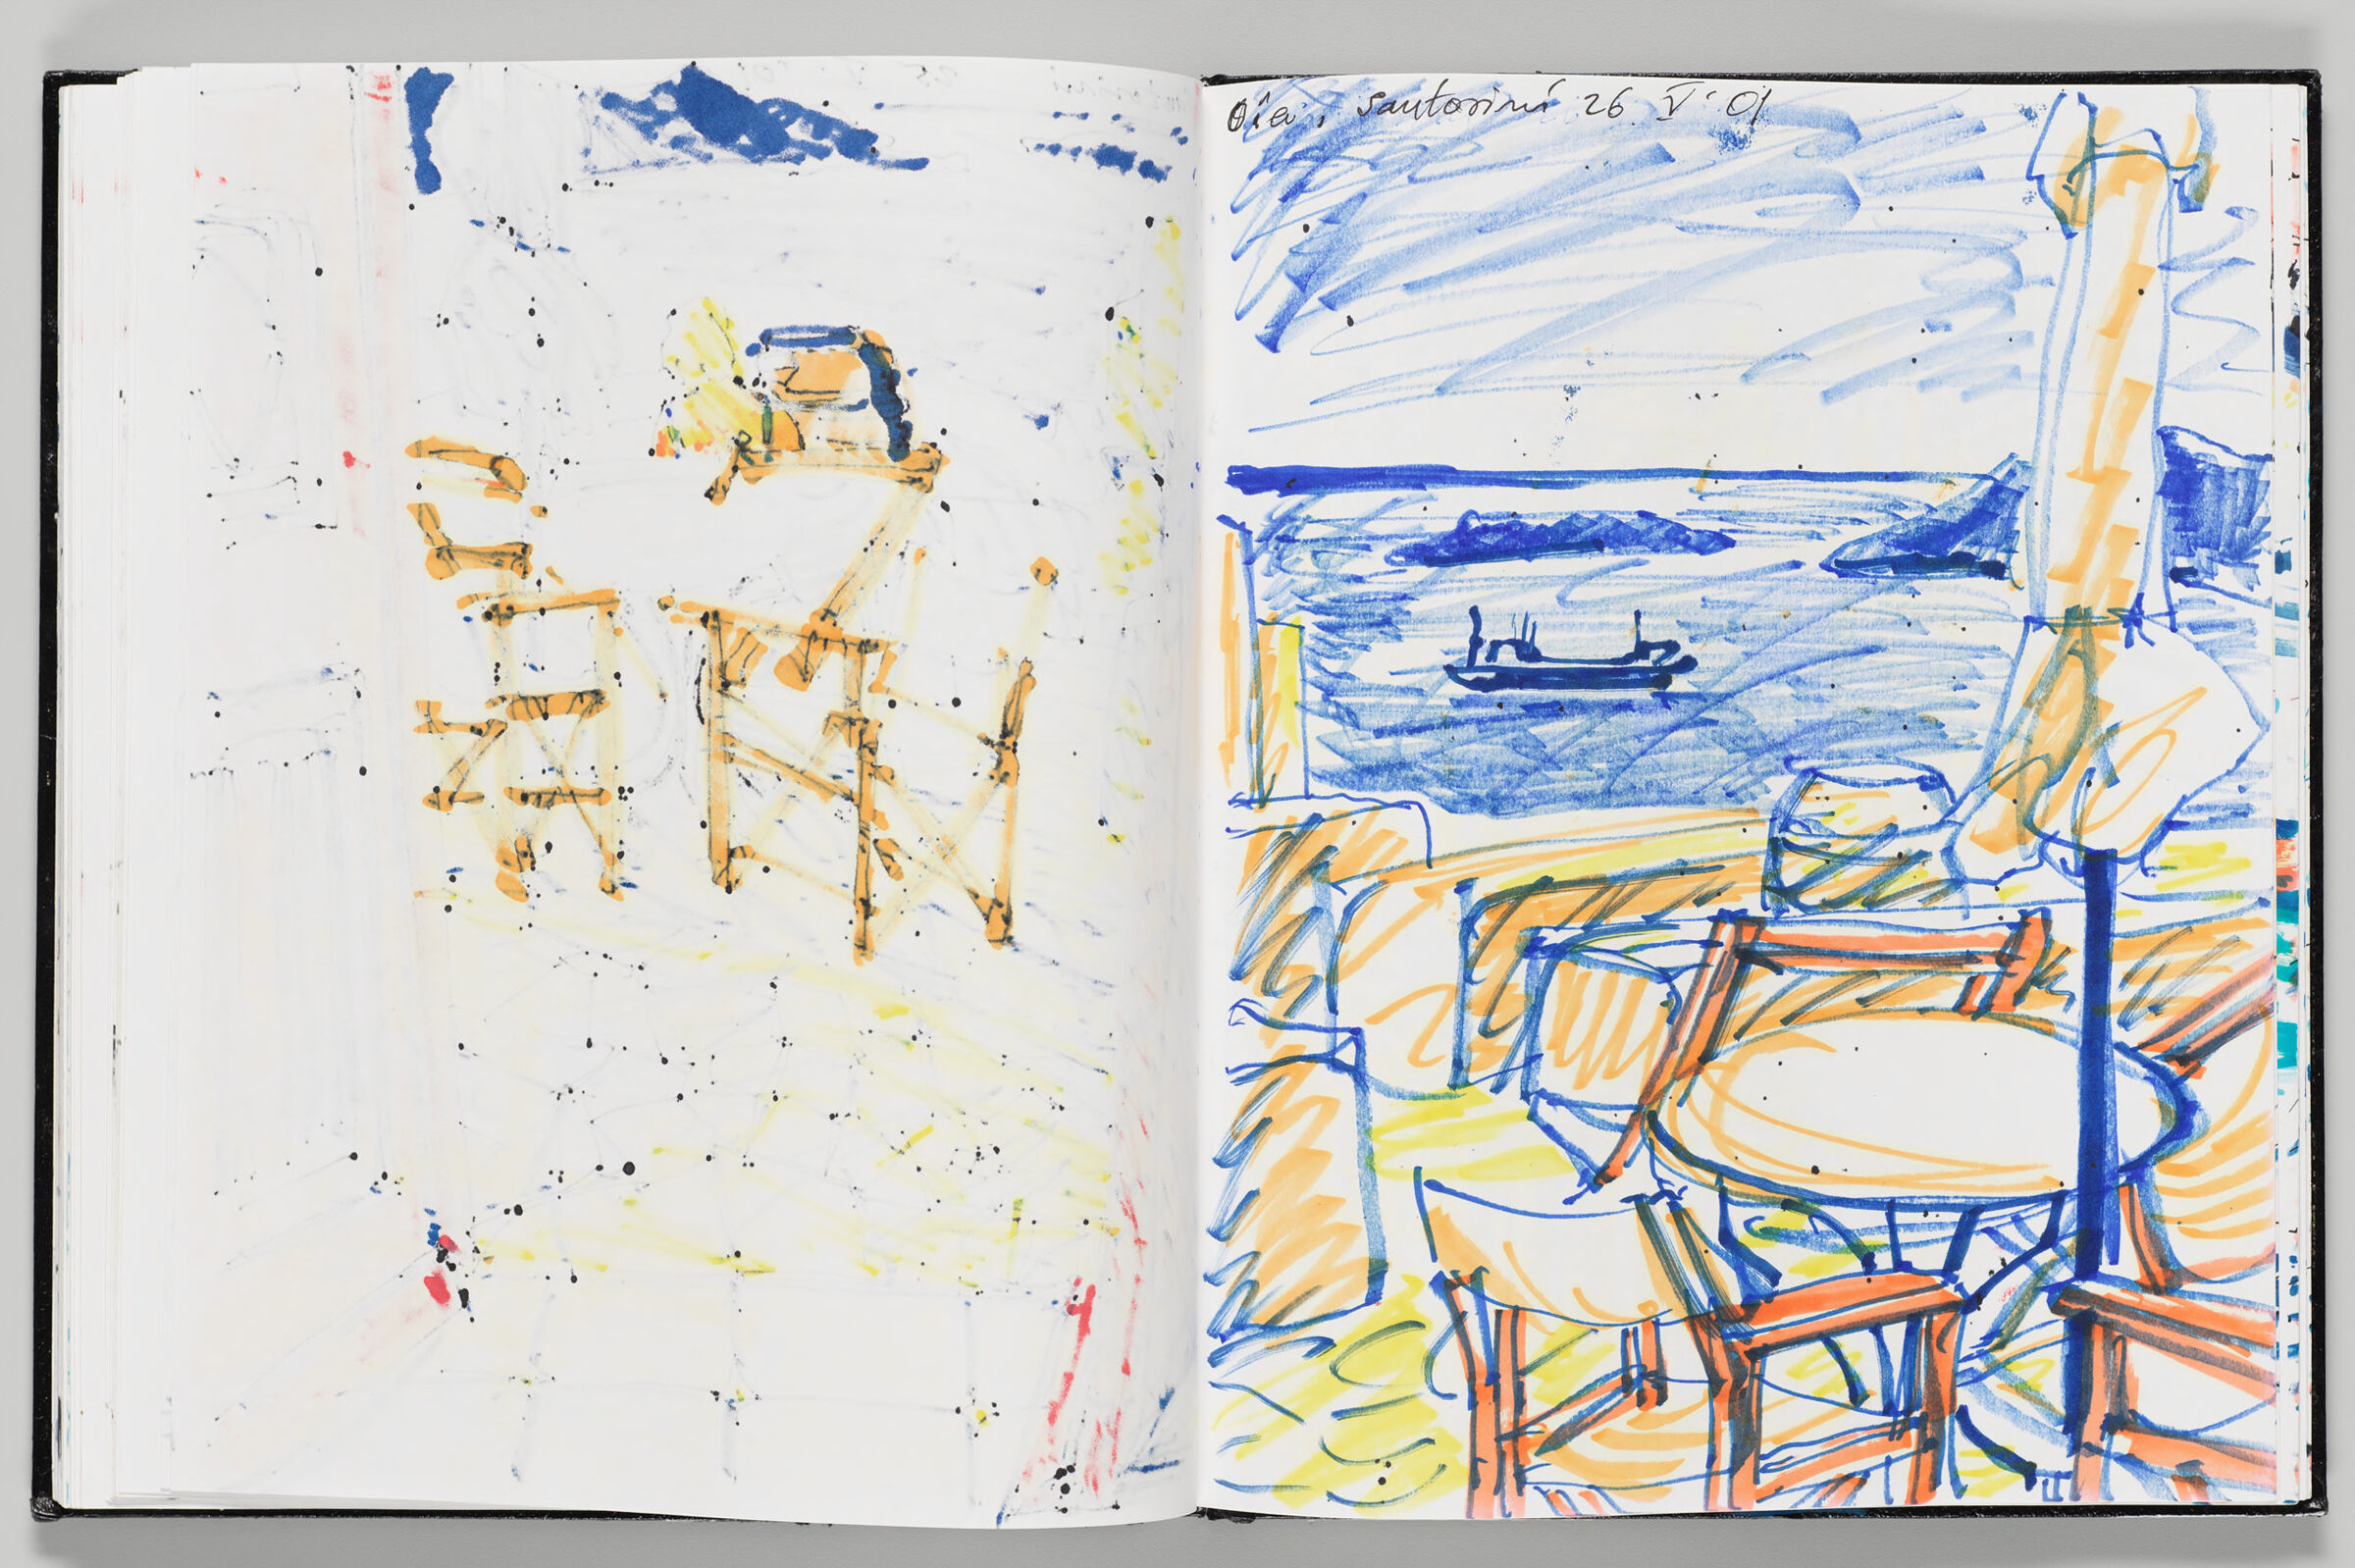 Untitled (Bleed-Through From Previous Page, Left Page); Untitled (View Of Santorini, Right Page)